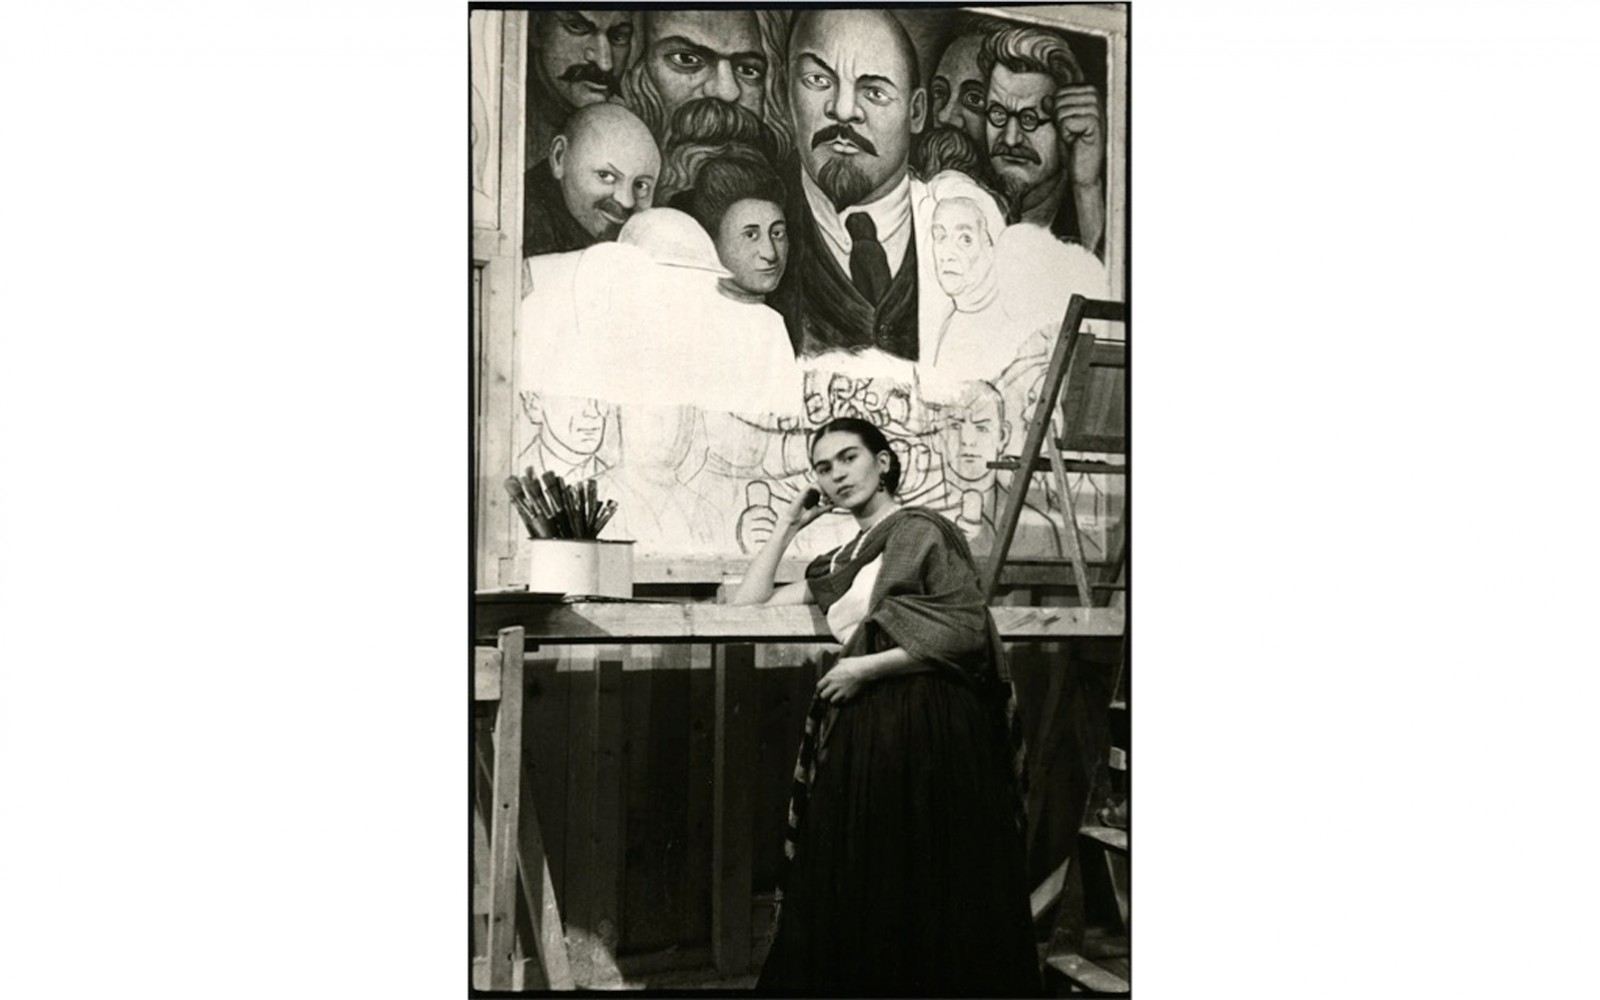 New-Workers-School-10-Frida-in-Front-of-Unfinished-Unity-Panel-LOW-RES